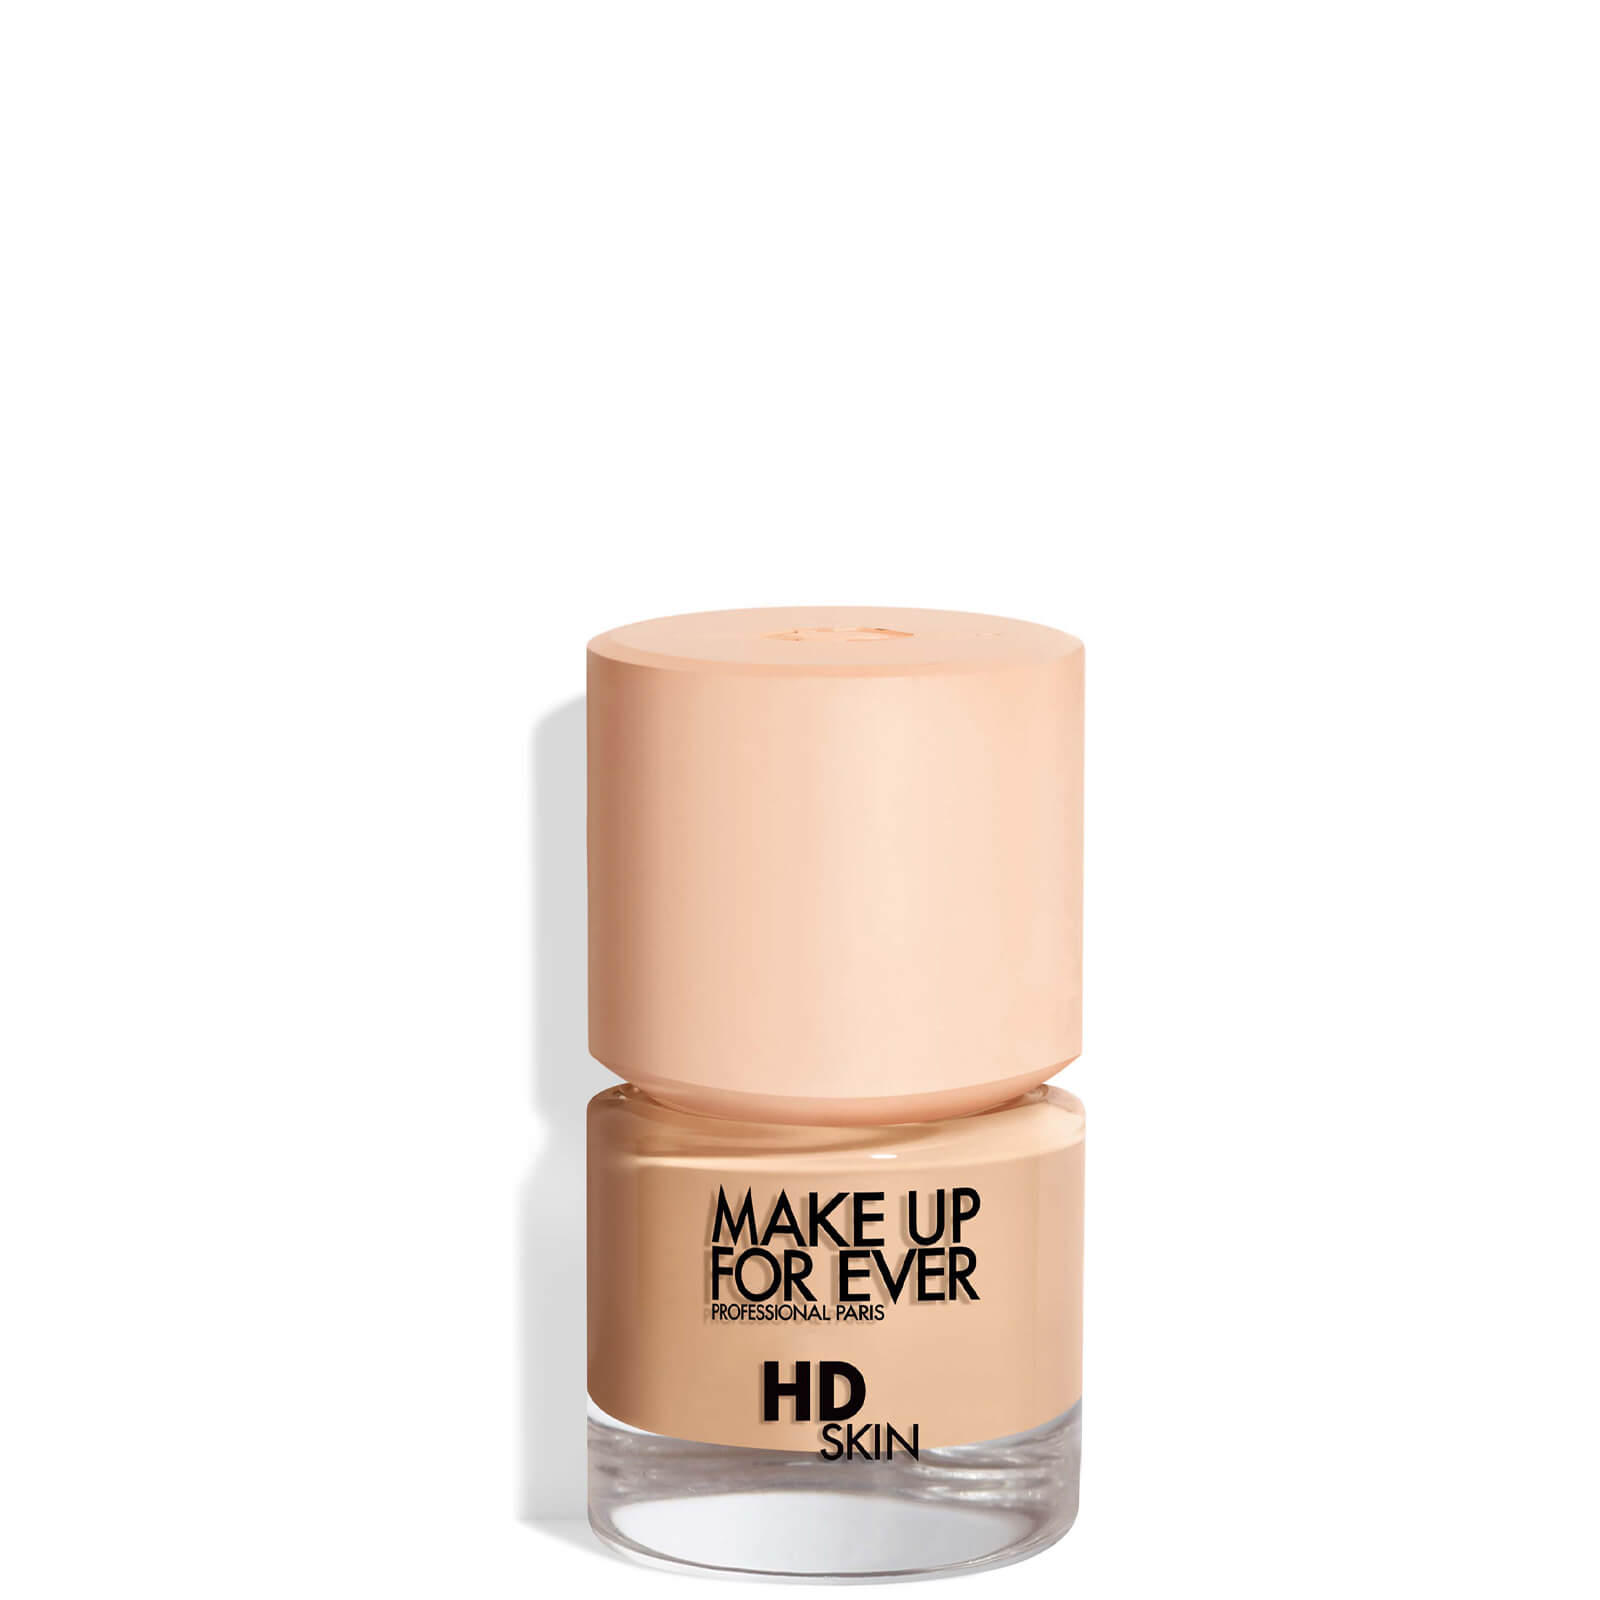 MAKE UP FOR EVER HD Skin Foundation Travel Size 12ml (Various Shades) - 1N14 - Neutral Sand